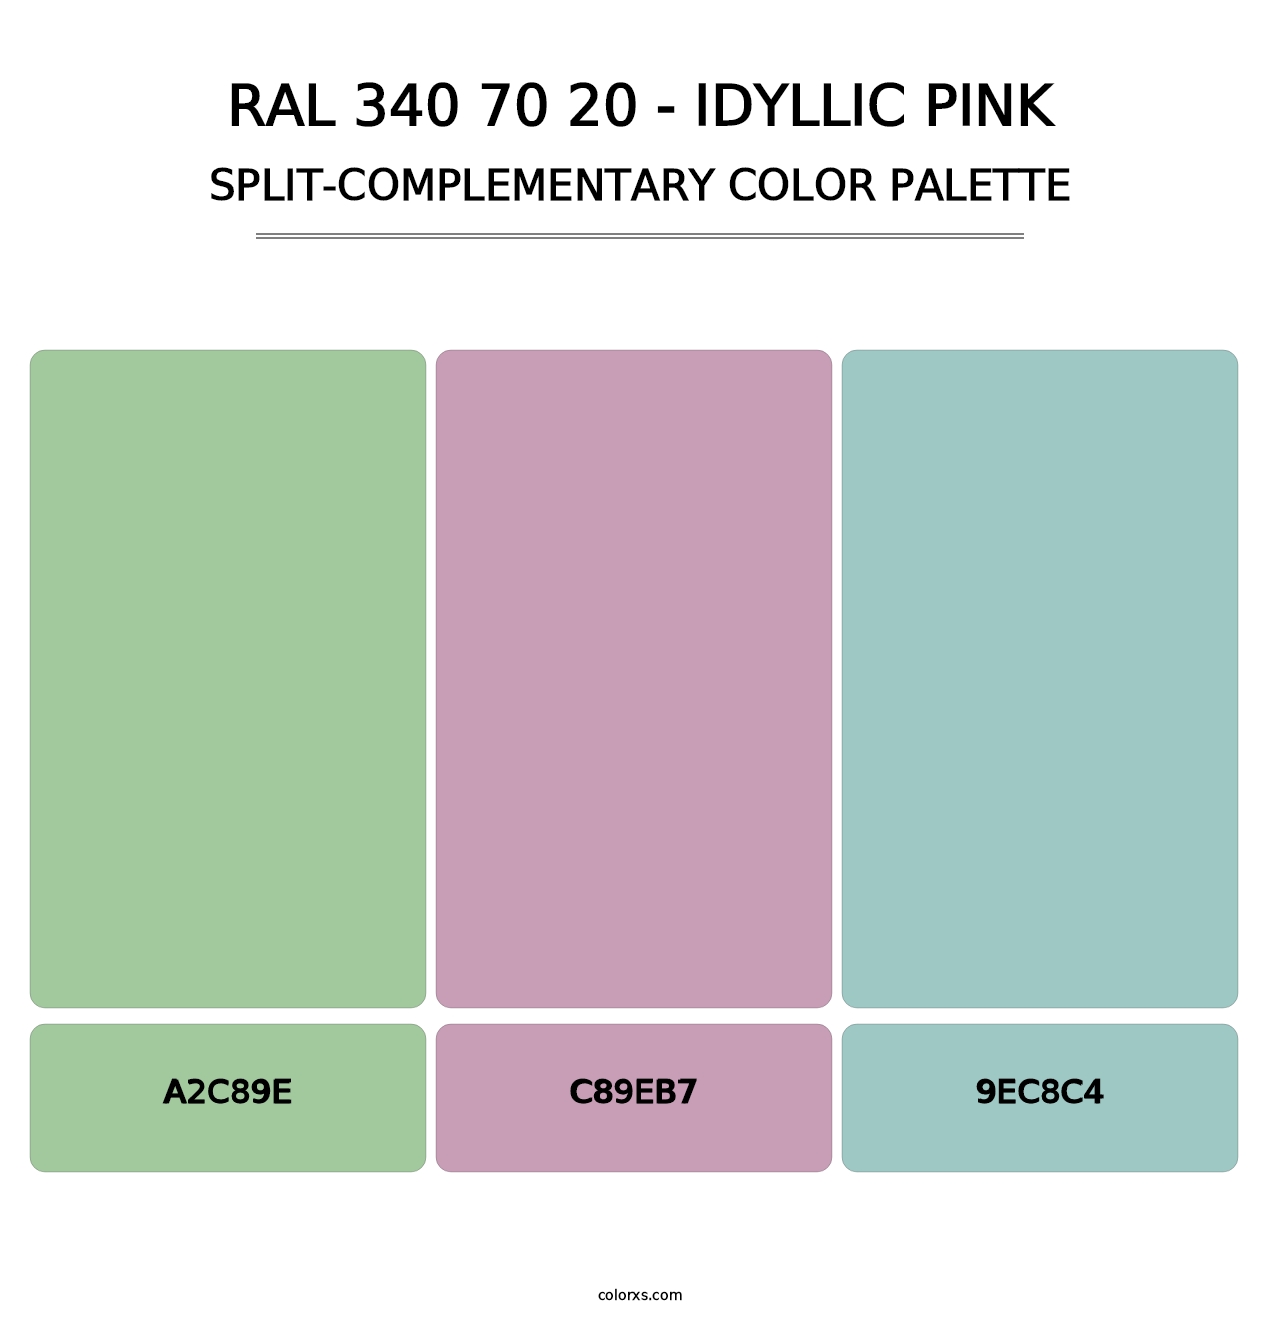 RAL 340 70 20 - Idyllic Pink - Split-Complementary Color Palette